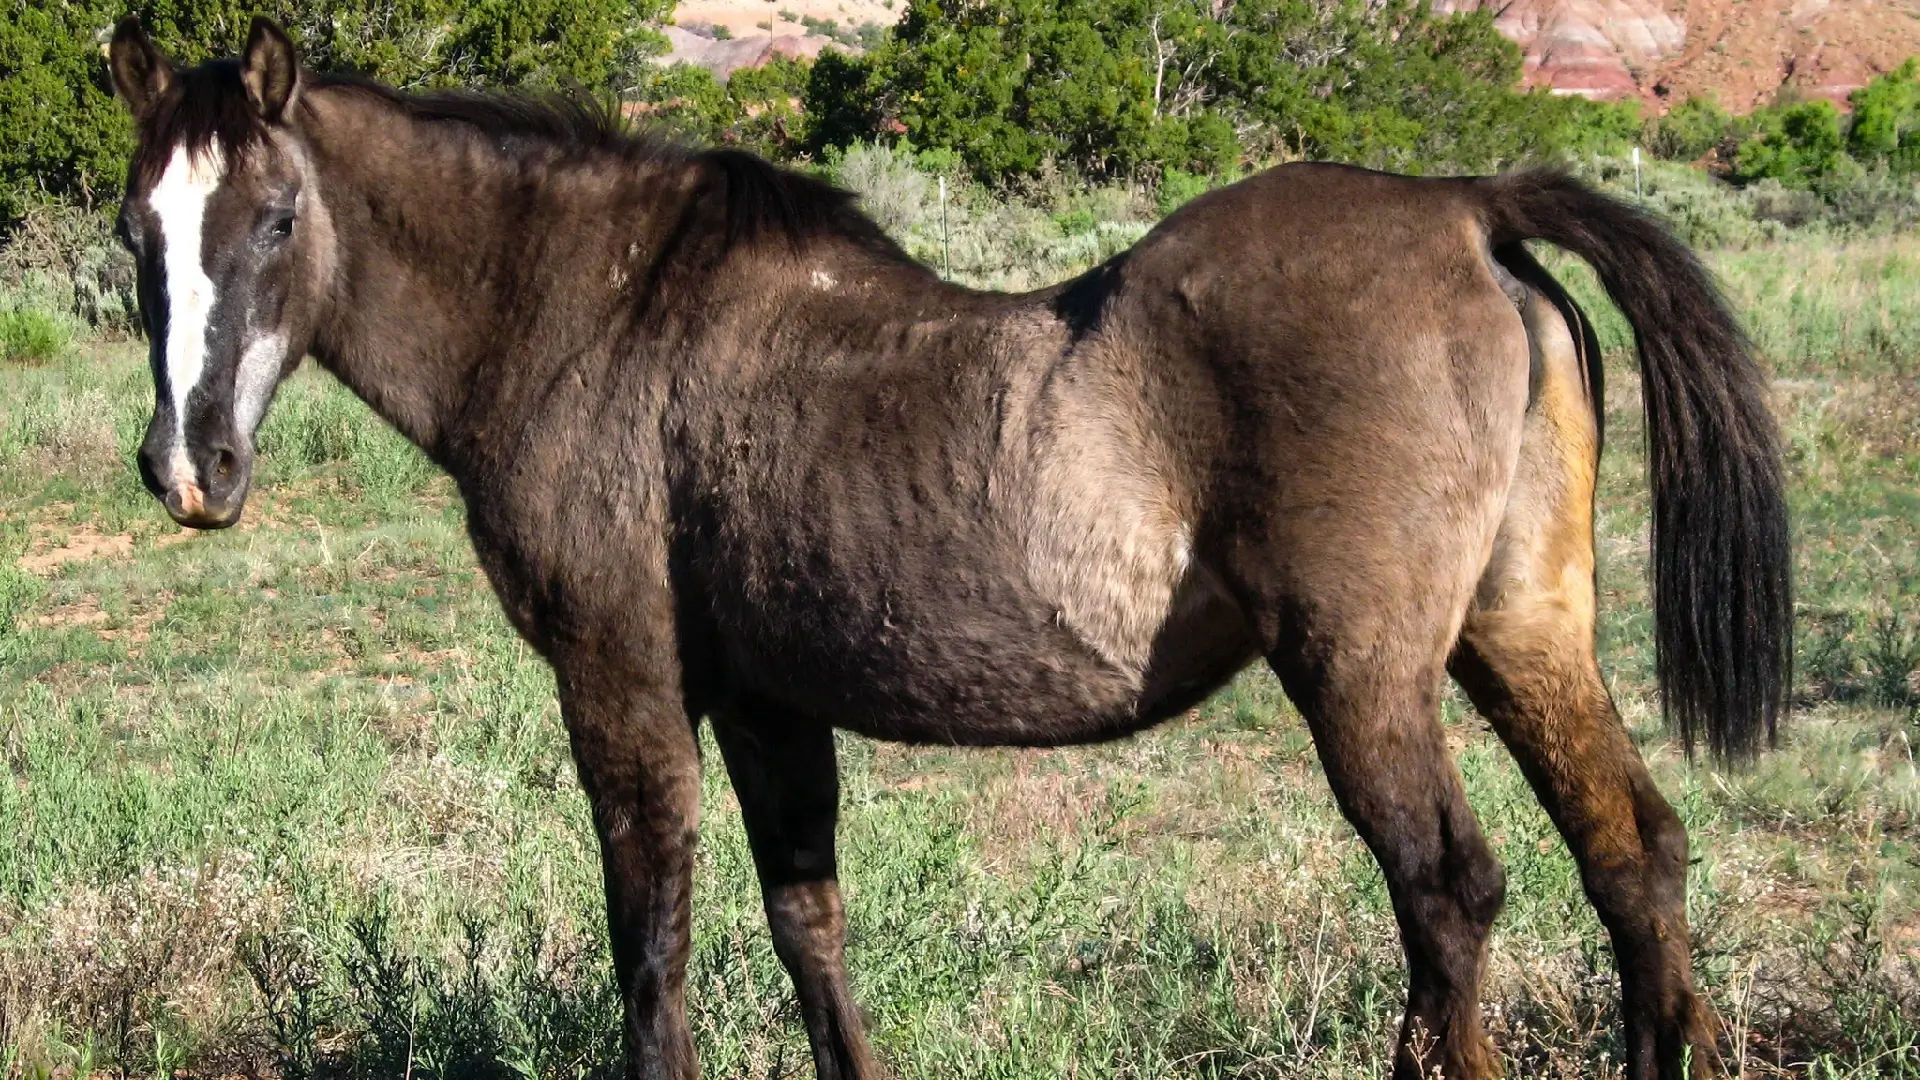 Crucial tips for caring for an elderly horse